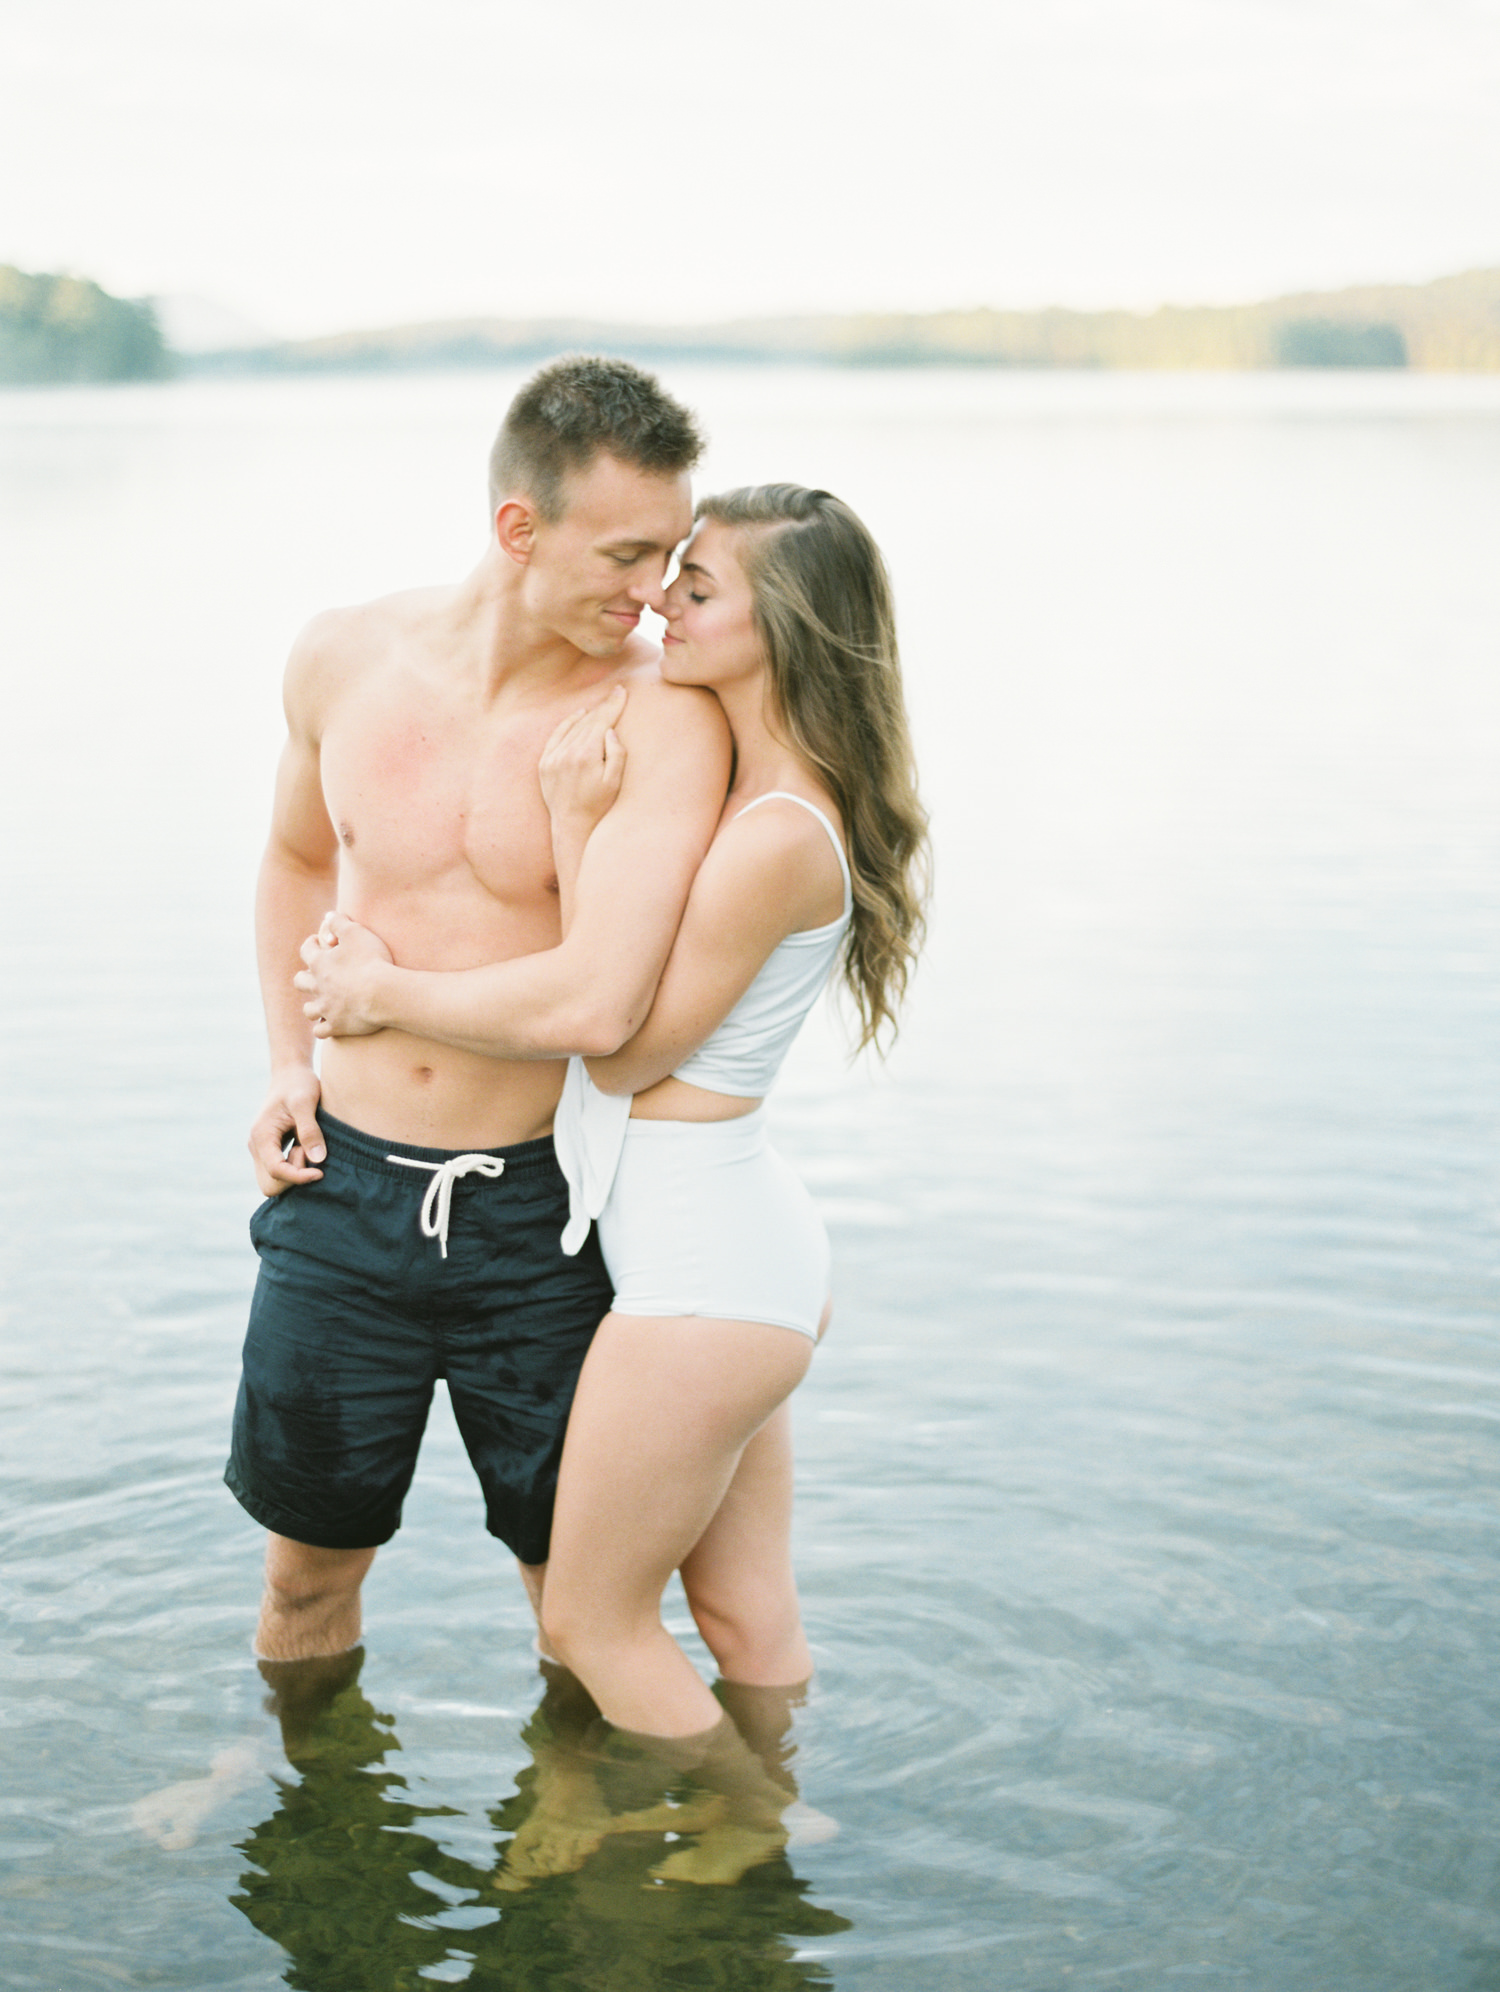 Lake Placid couple stands in water for a kiss in the Adirondacks | Mary Dougherty Photography